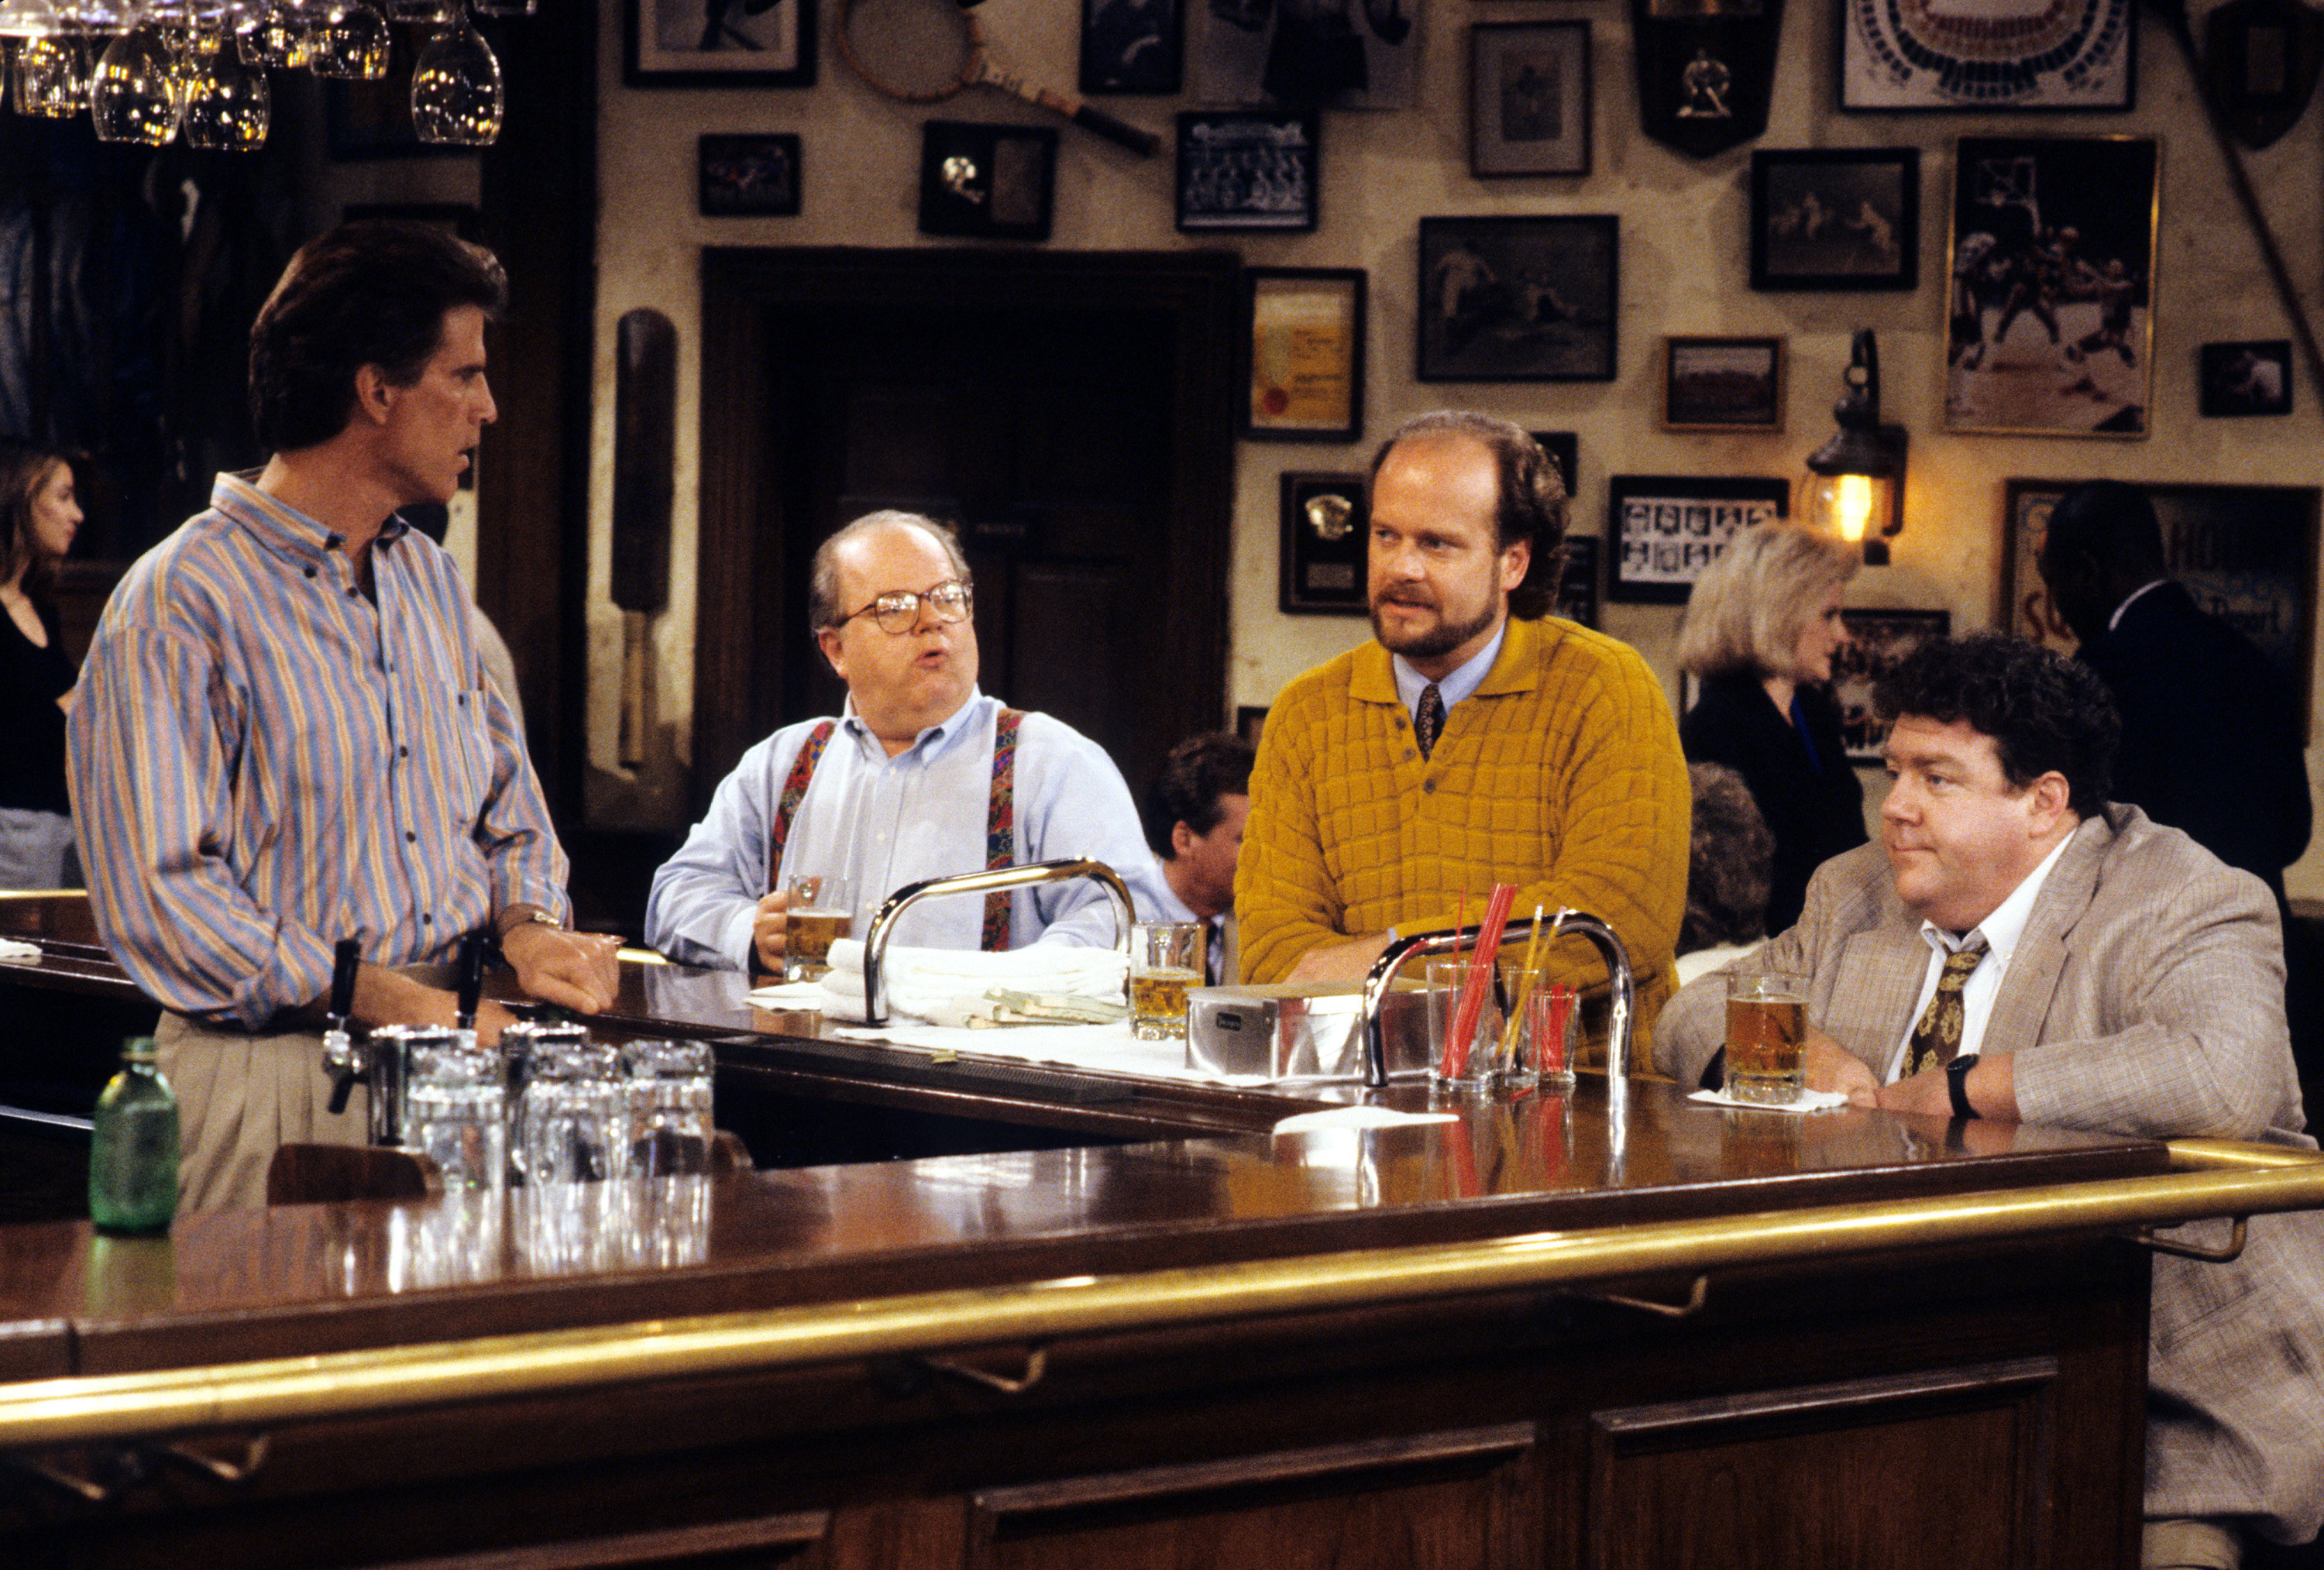 Ted Danson talking at the bar with Paul Wilson, Kelsey Grammer, and George Wendt.